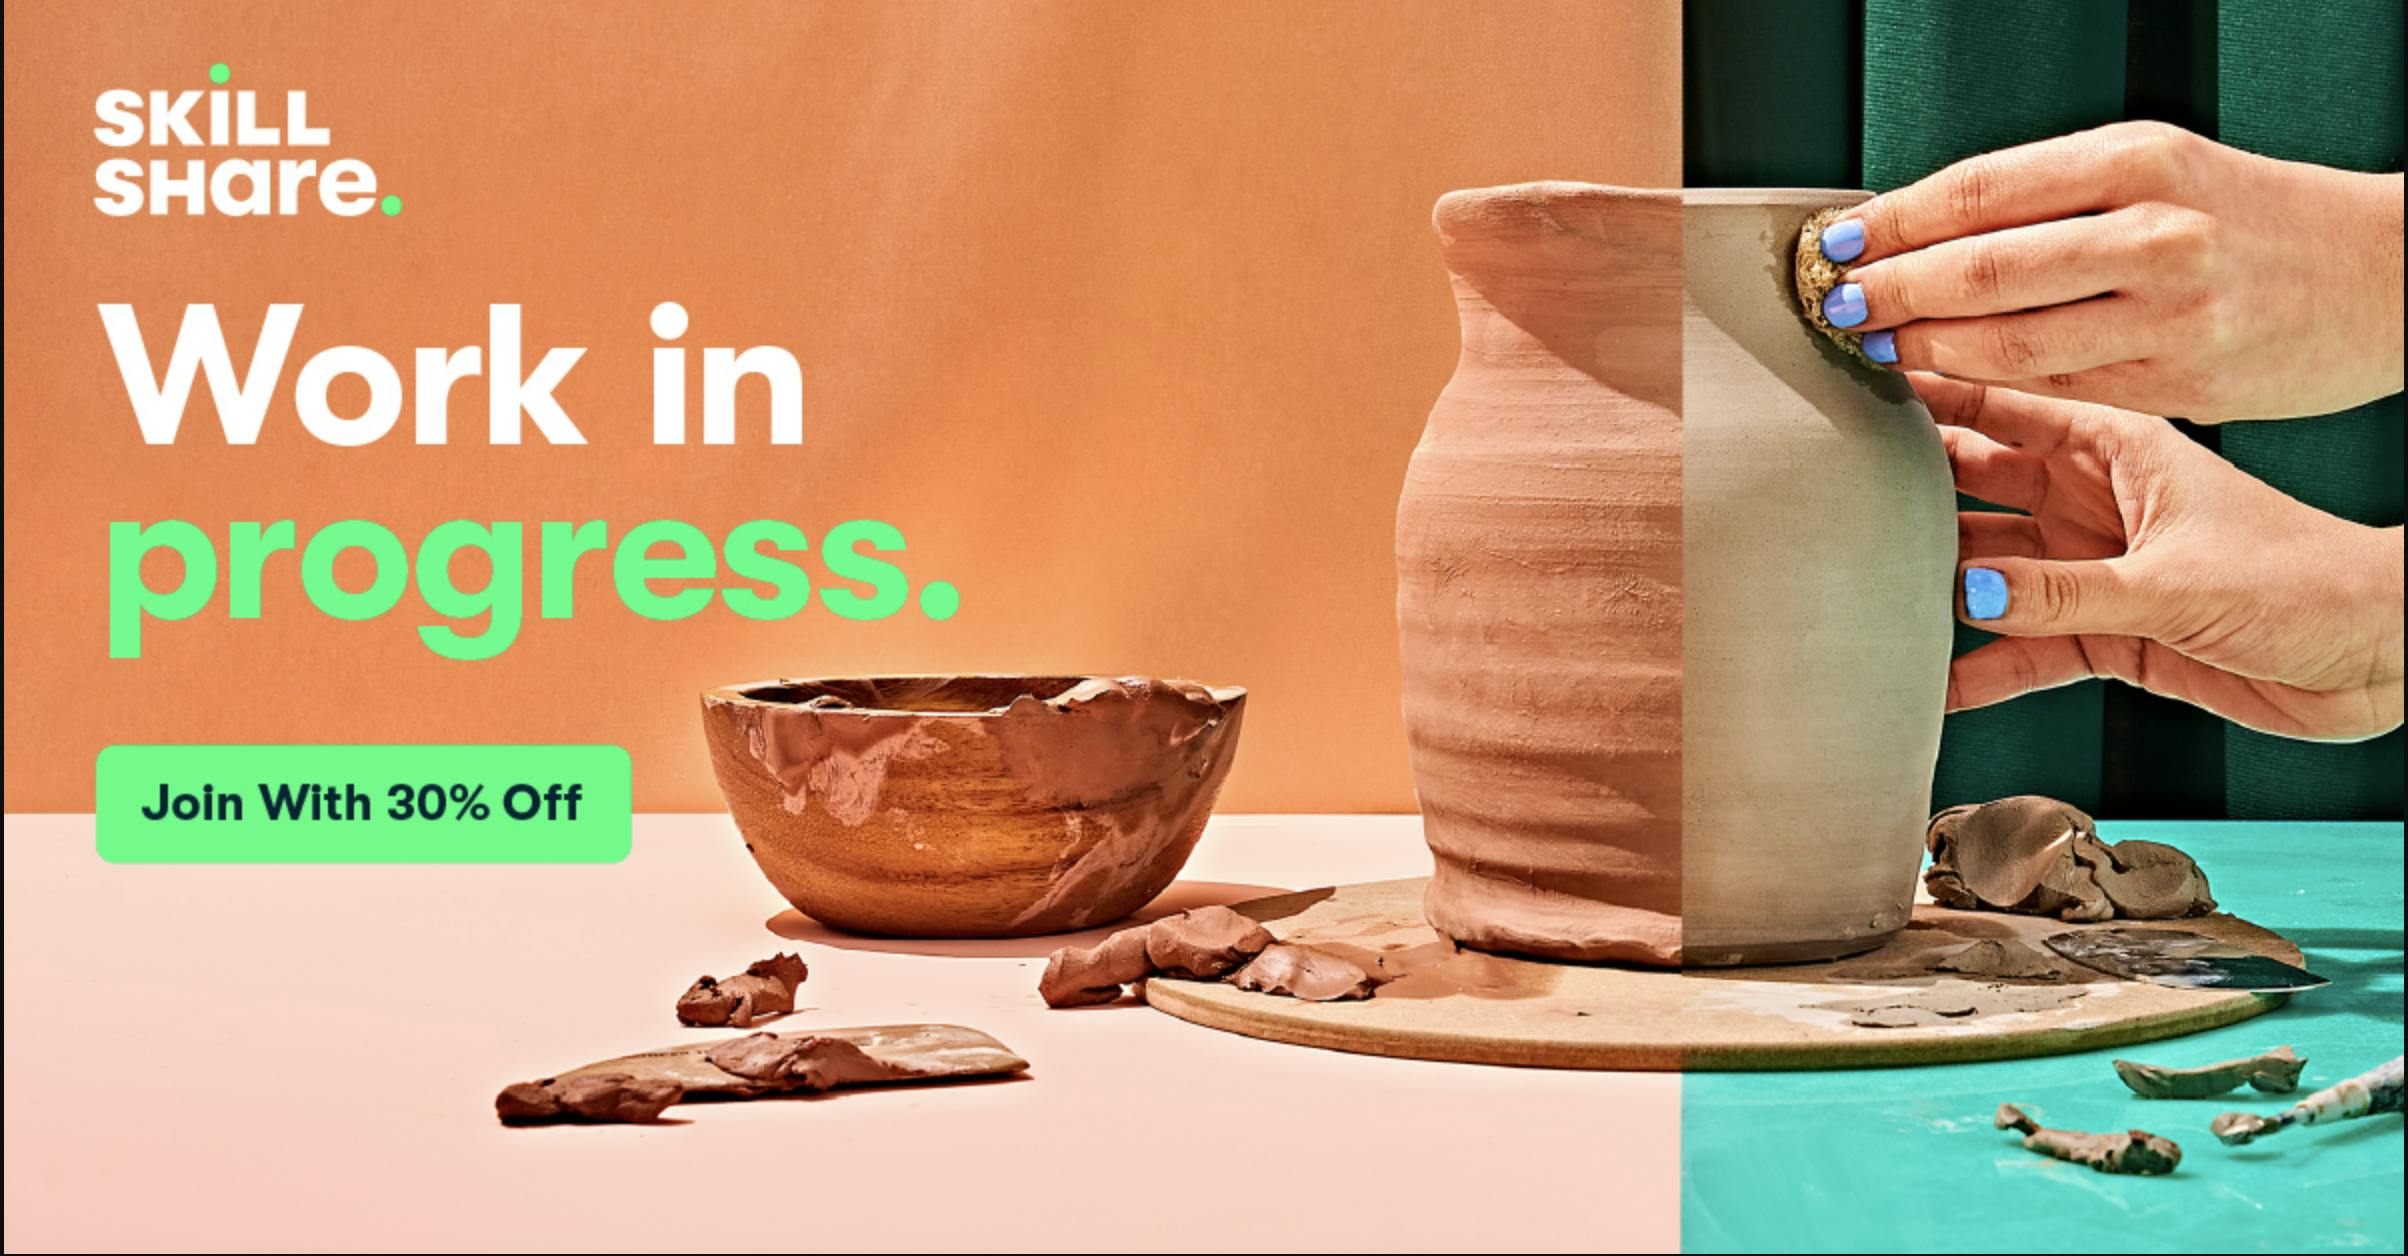 Skillshare promotional image featuring pottery making with the text ‘Work in progress. Join With 30% Off.